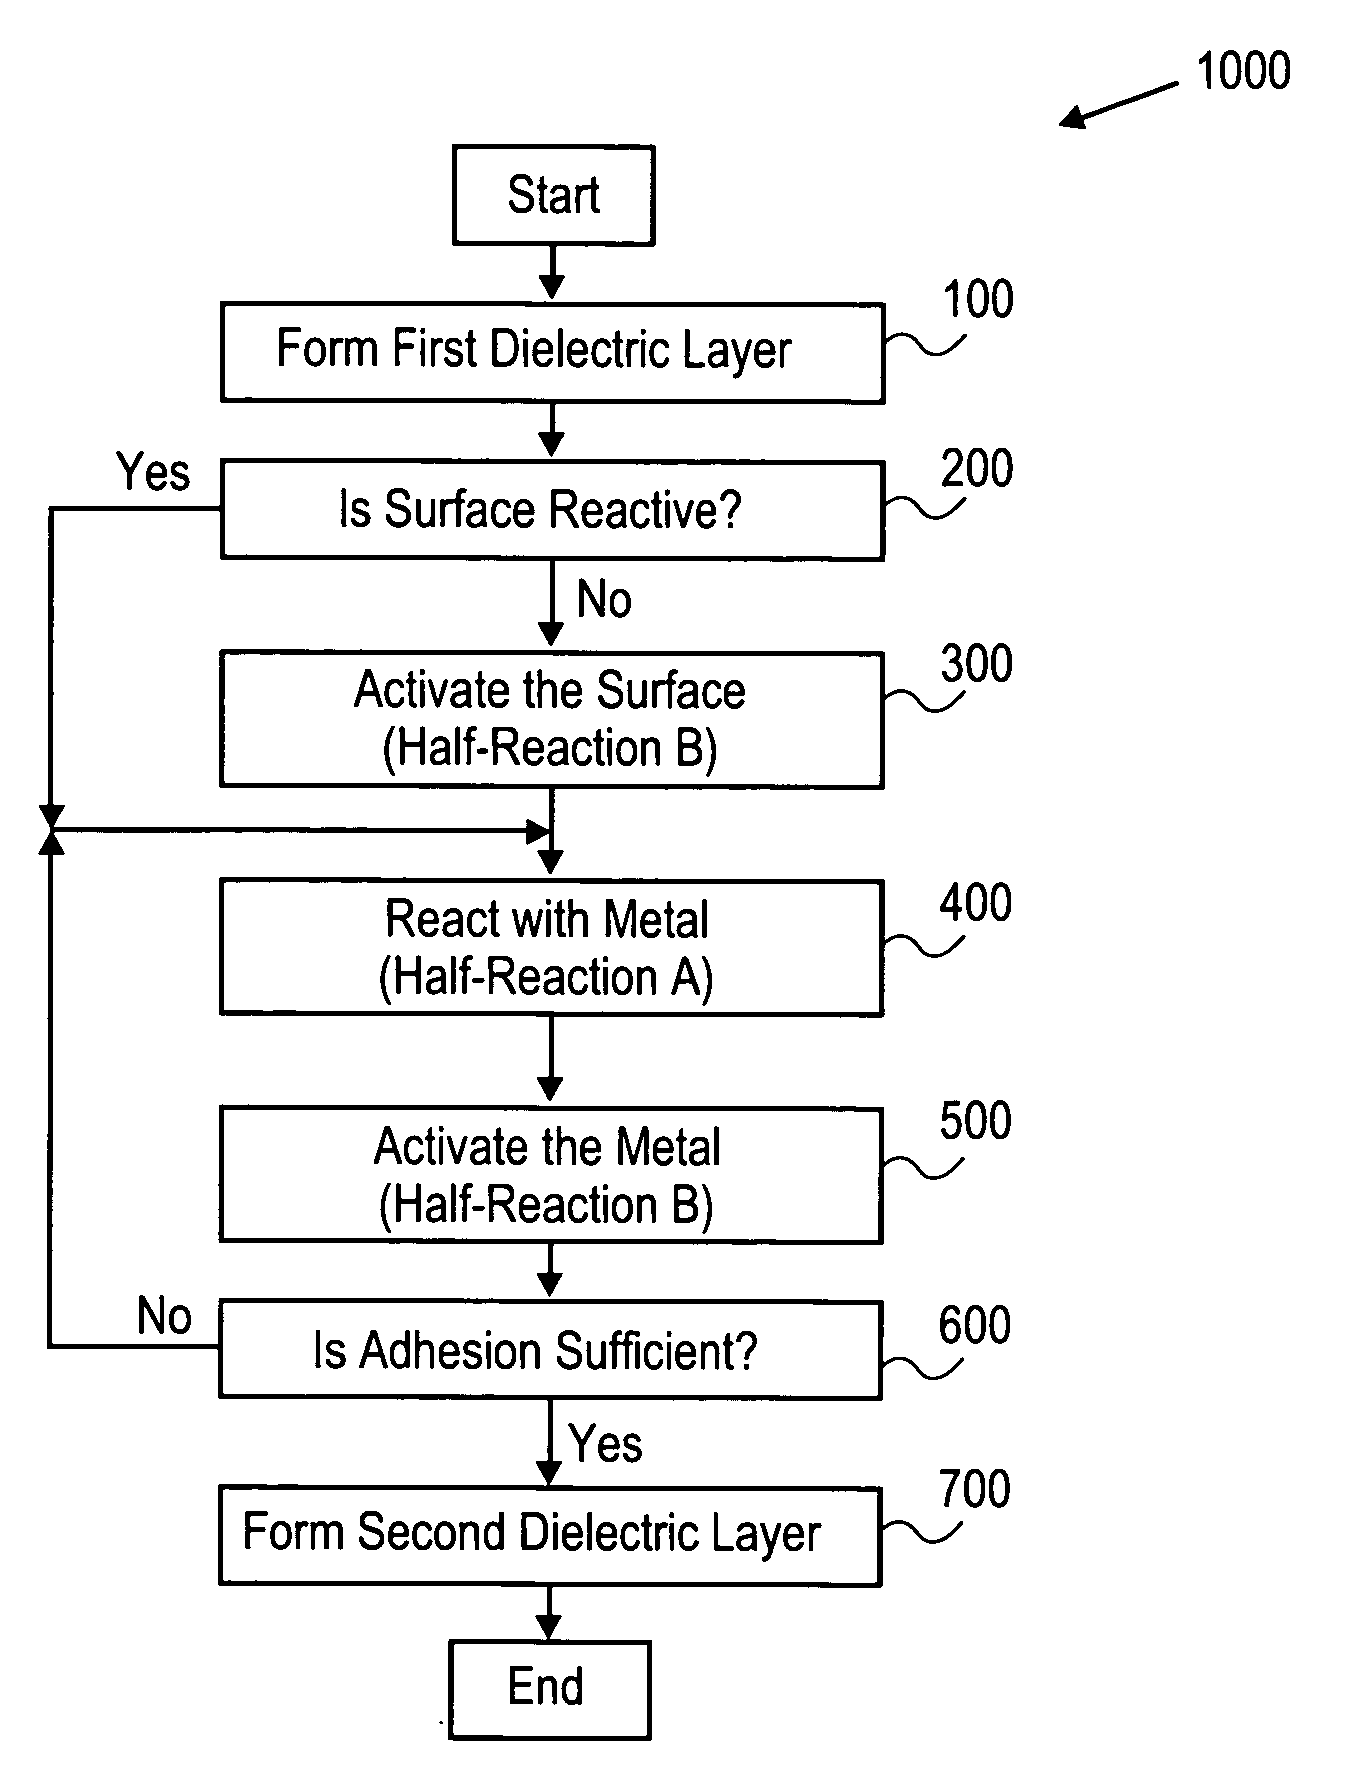 Adhesion between dielectric materials